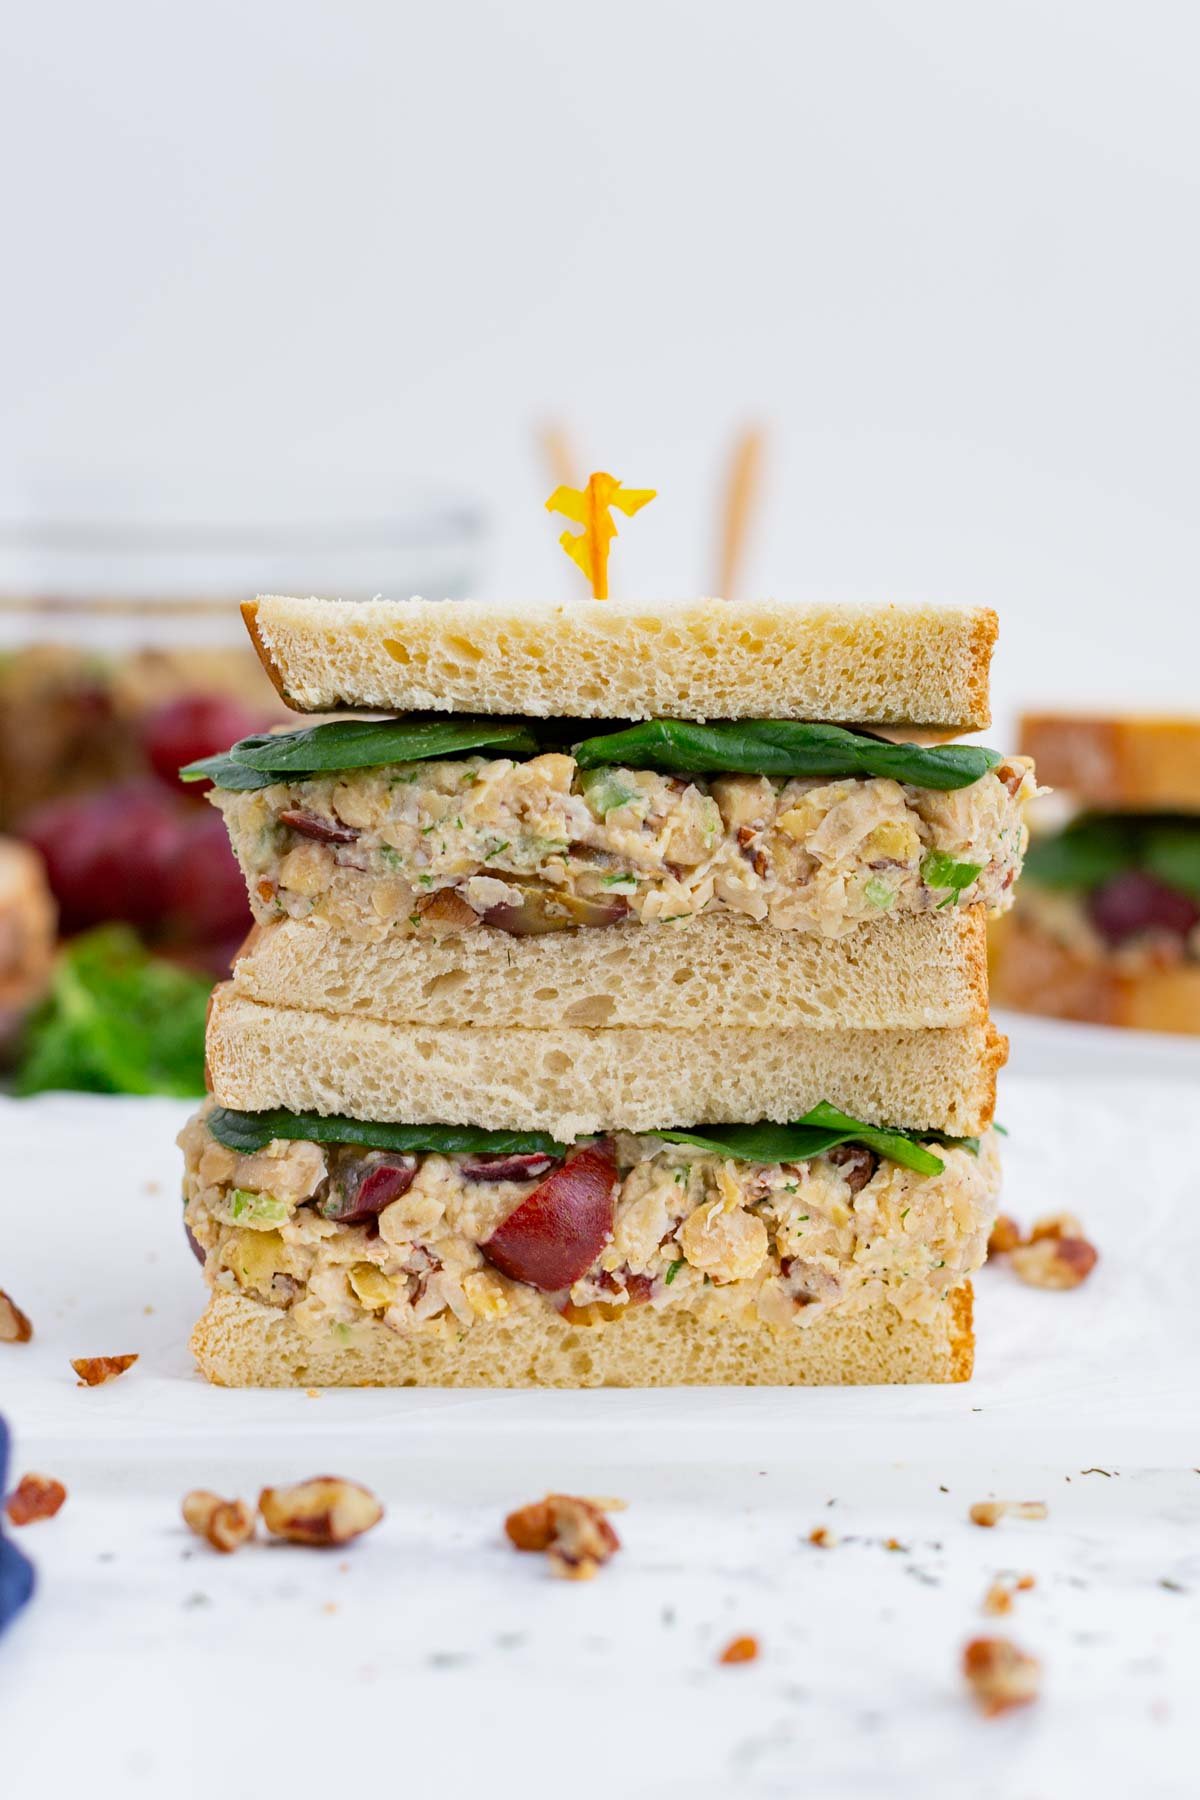 Two halves of a chickpea salad sandwich are stacked on top of each other.